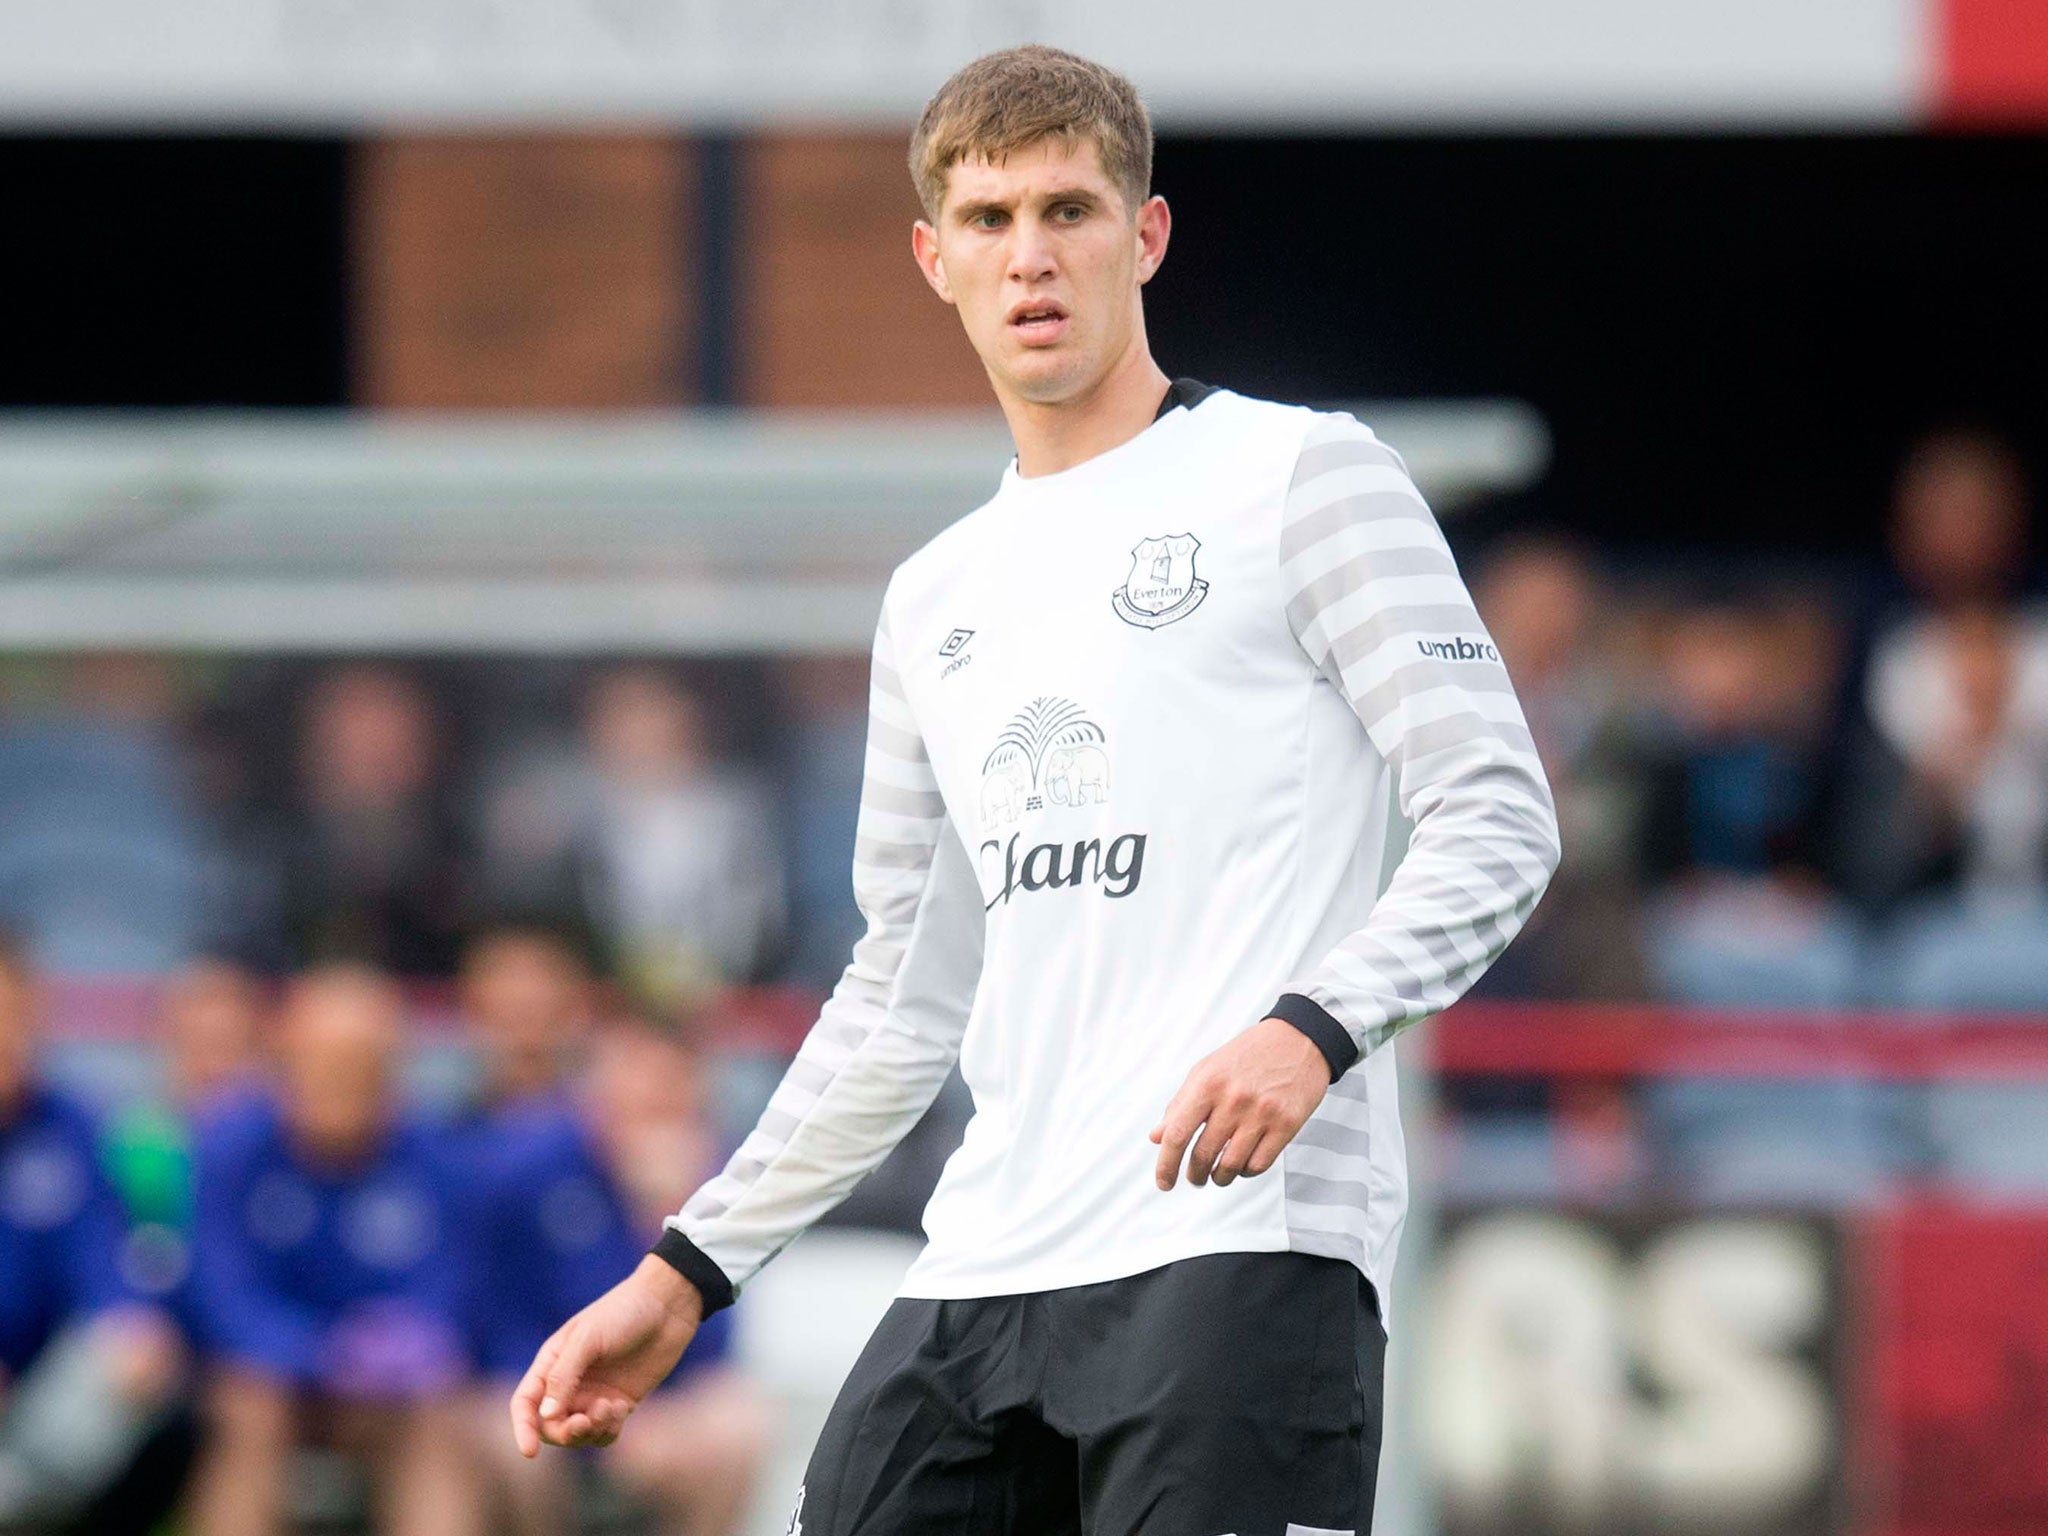 Everton are determined not to sell Stones this summer